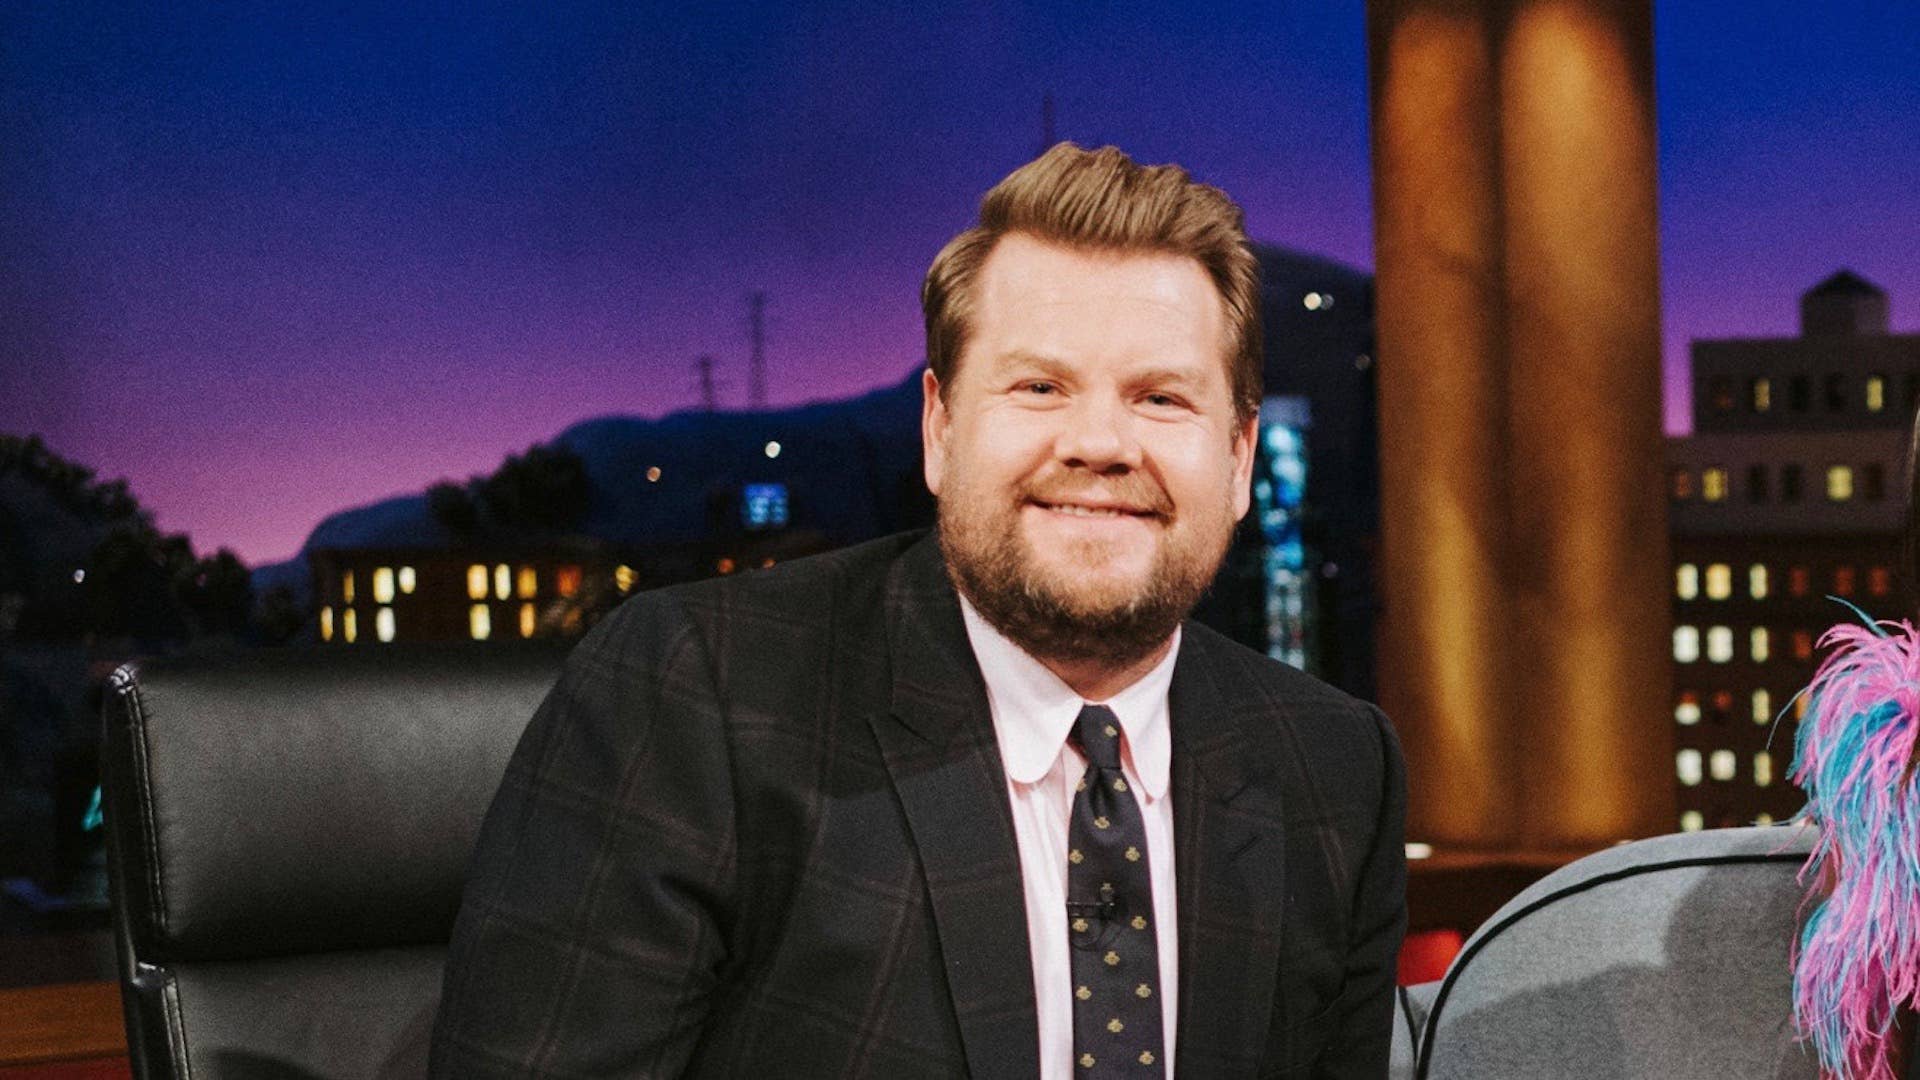 James Corden to Replace Craig Ferguson as Host of 'The Late Late Show' on  CBS - The New York Times